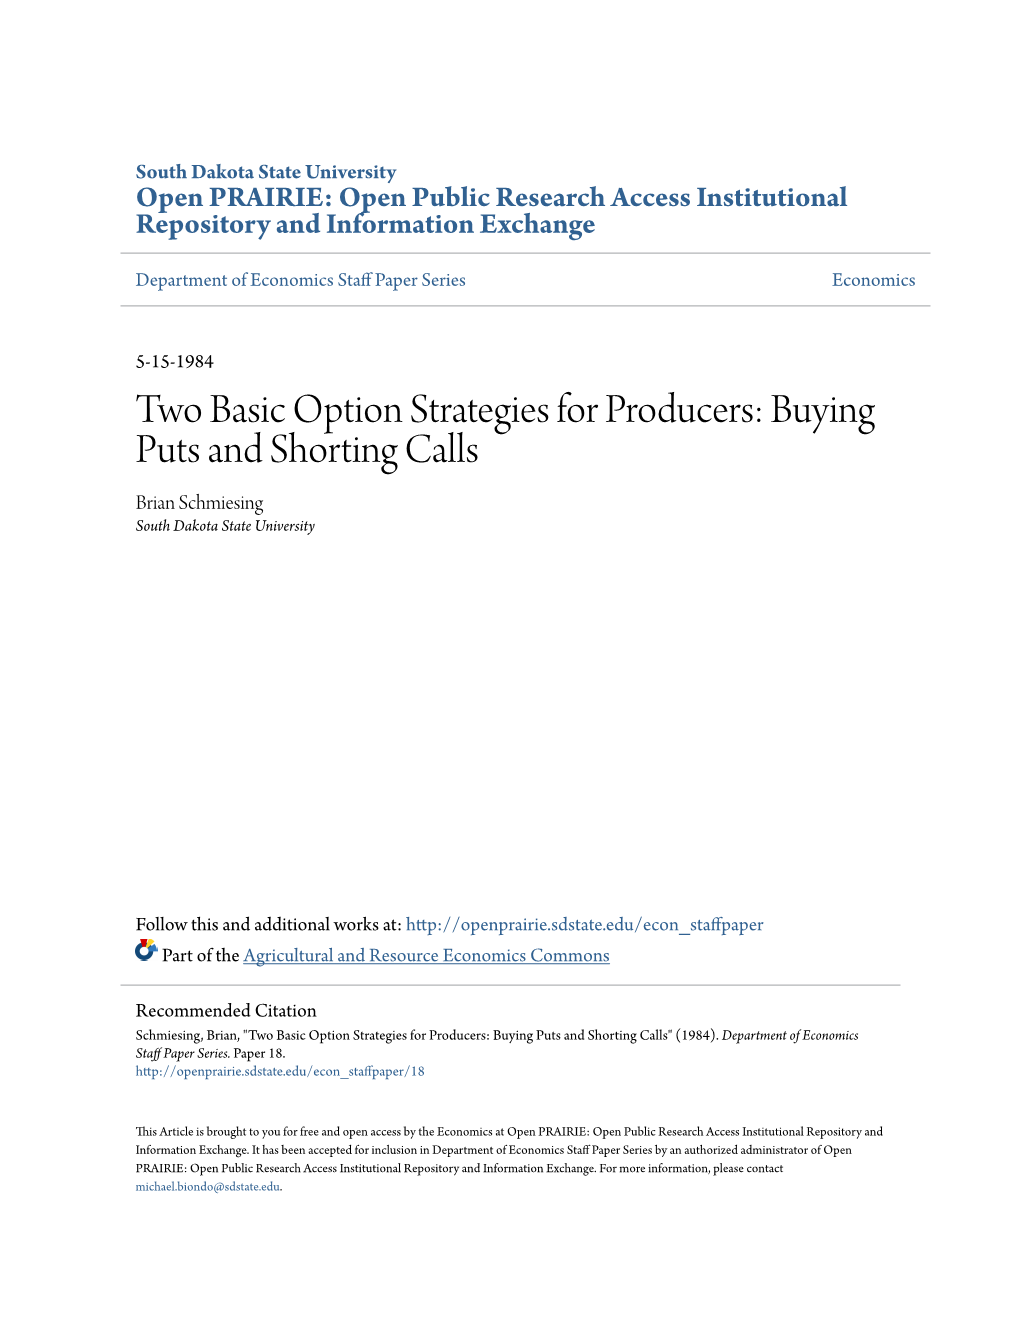 Two Basic Option Strategies for Producers: Buying Puts and Shorting Calls Brian Schmiesing South Dakota State University